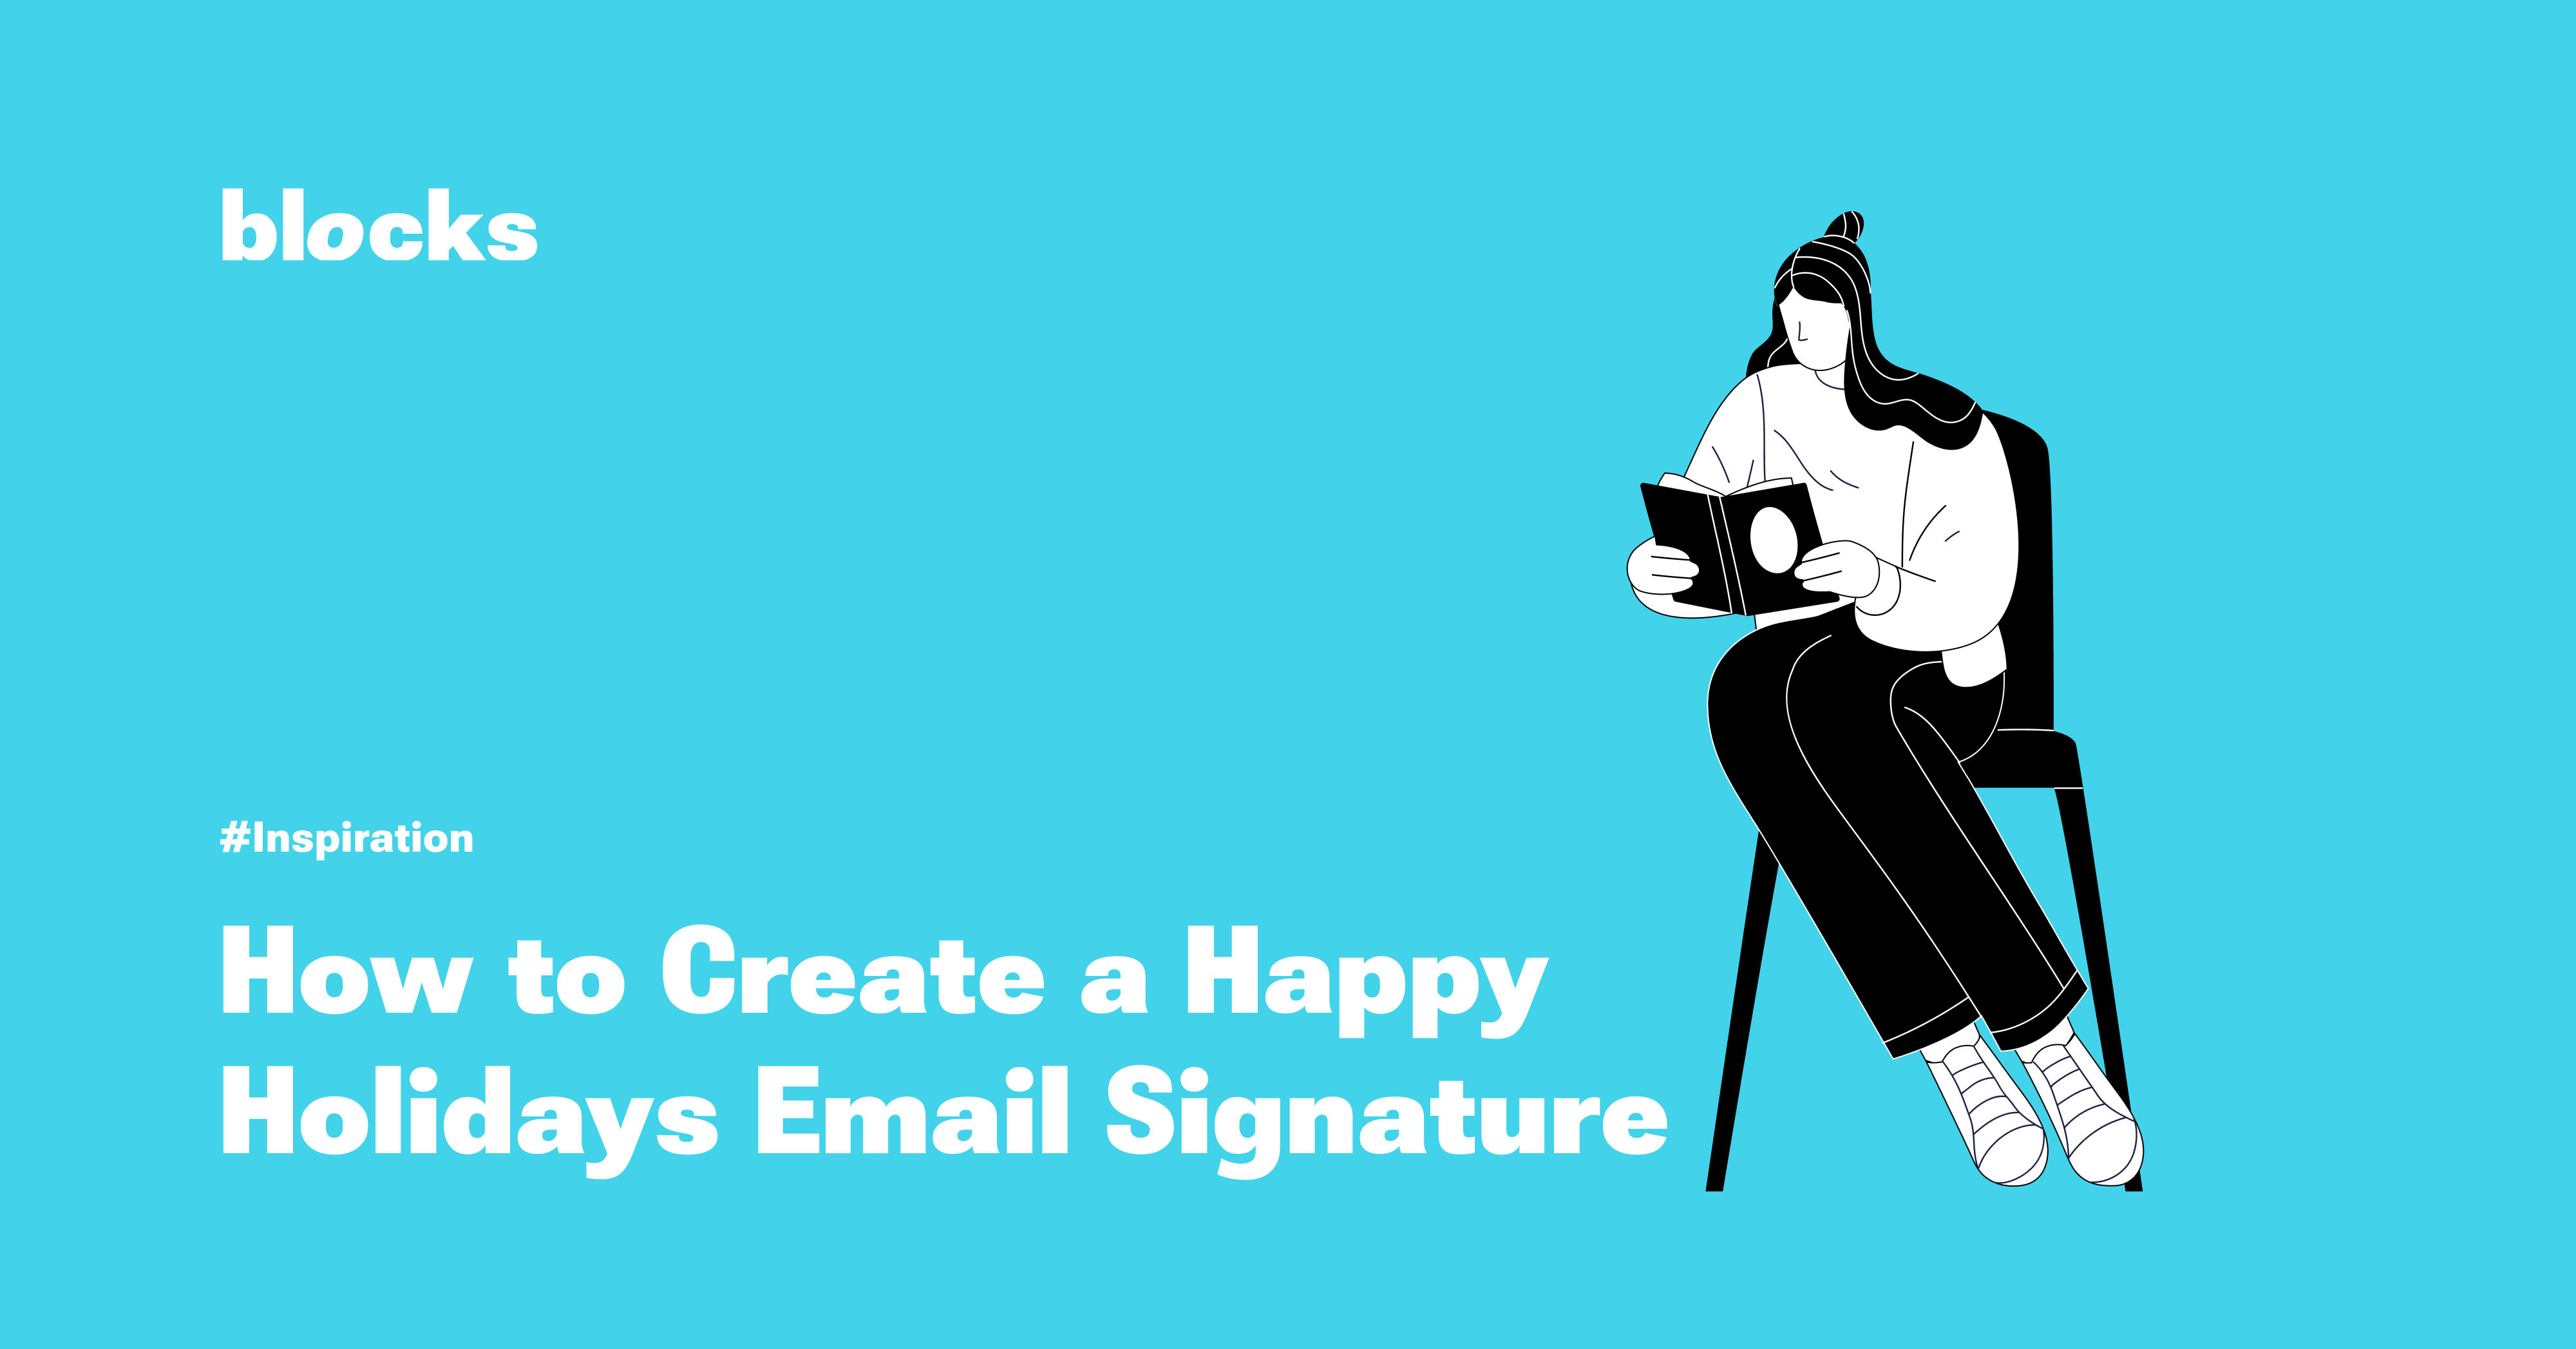 how-to-create-a-happy-holidays-email-signature-tips-and-ideas-blocks